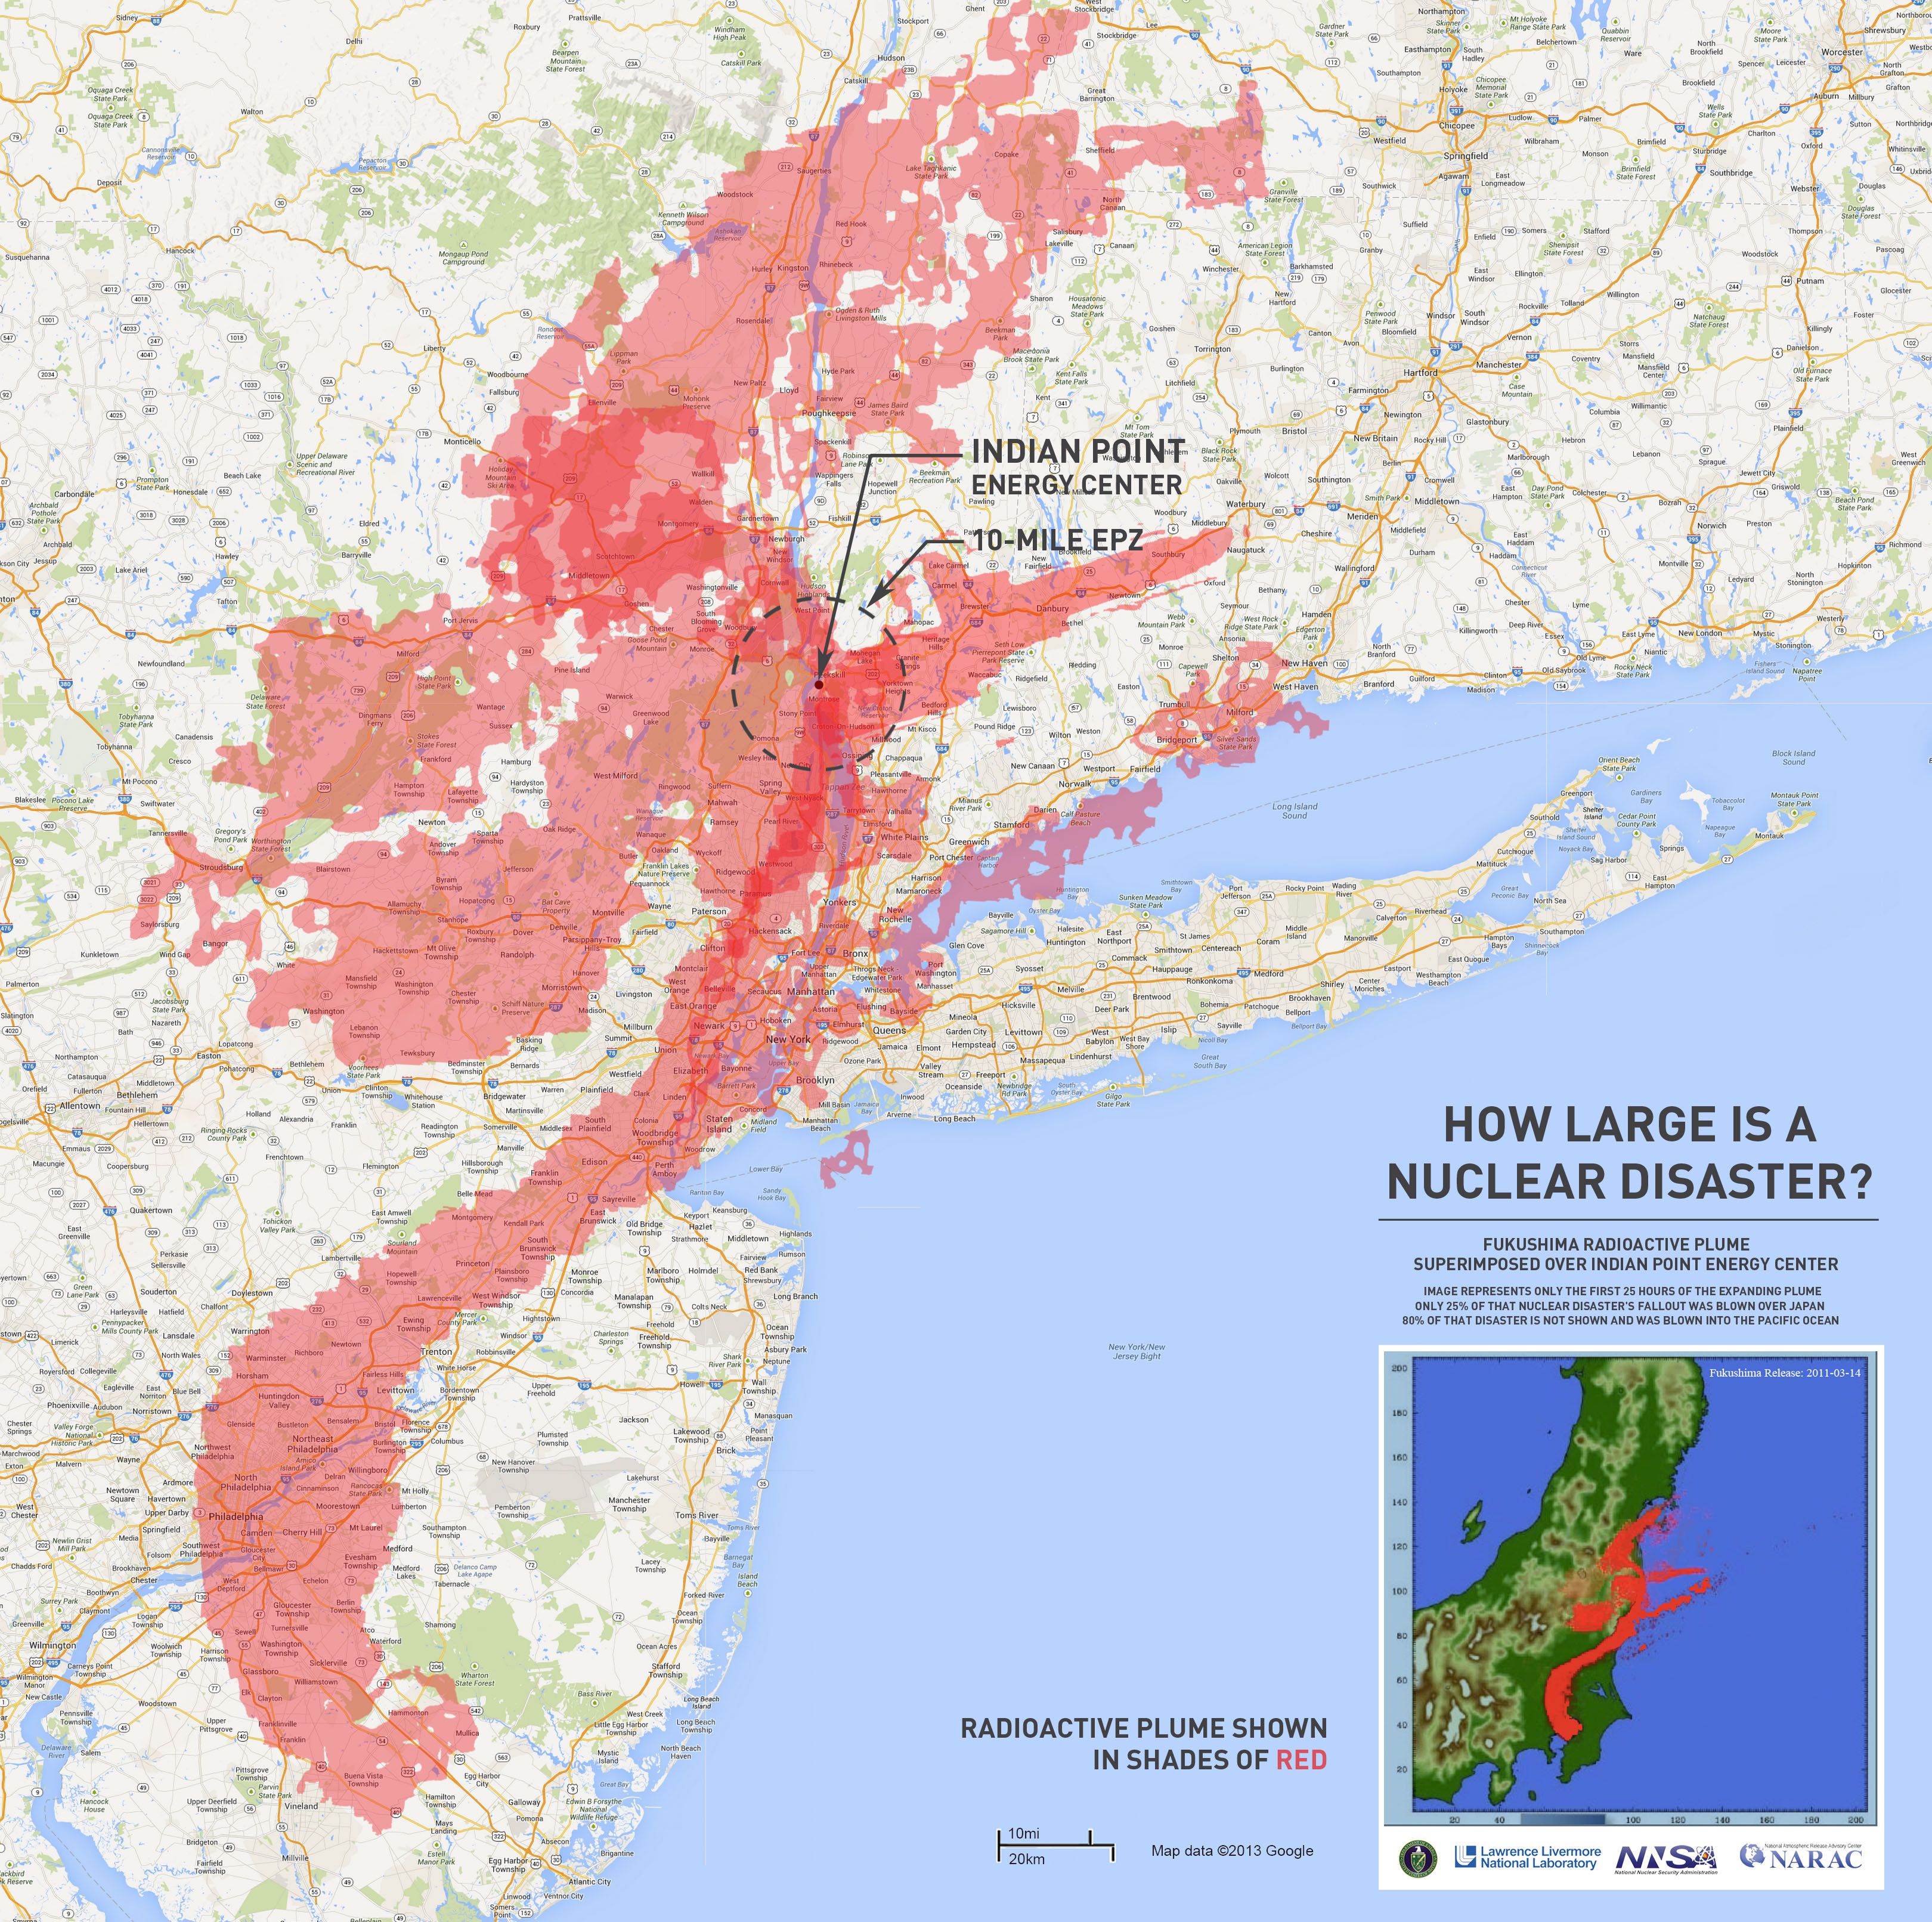 Fukushima radiation plume overlaid on map centered at Indian Point reactors. From Samuel Lawrence Foundation website.